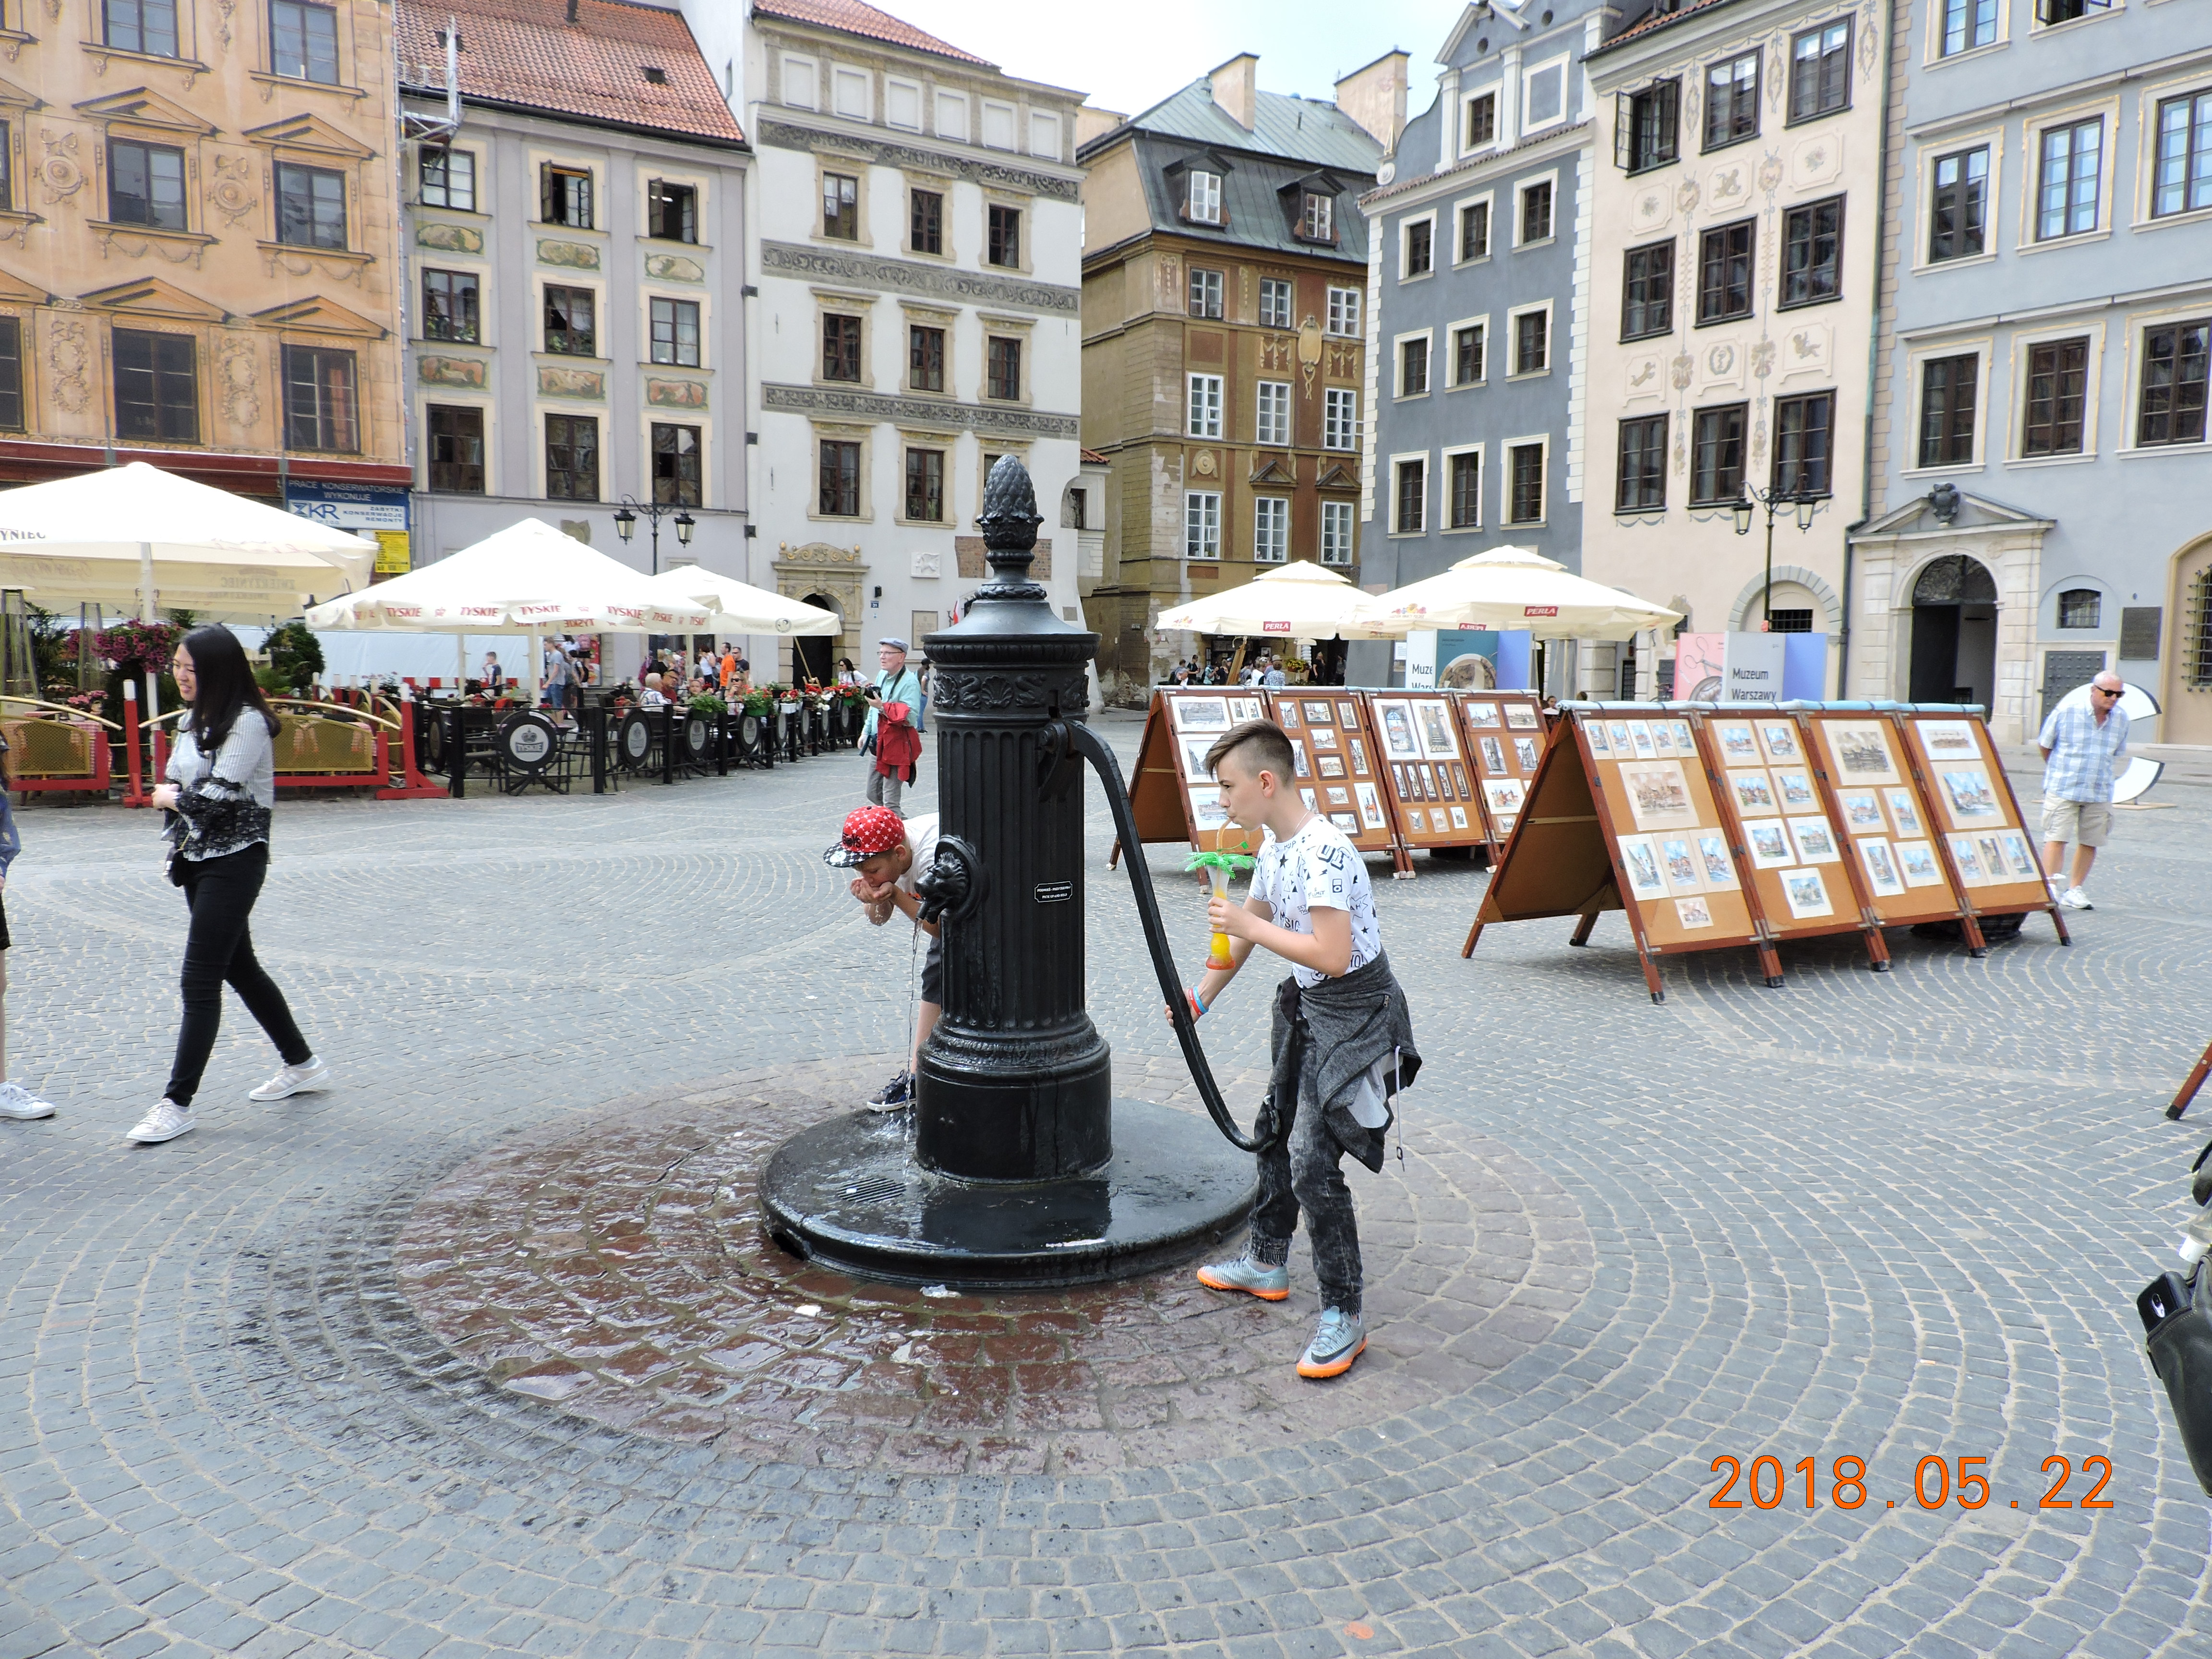 Warsaw Old Town Market Place